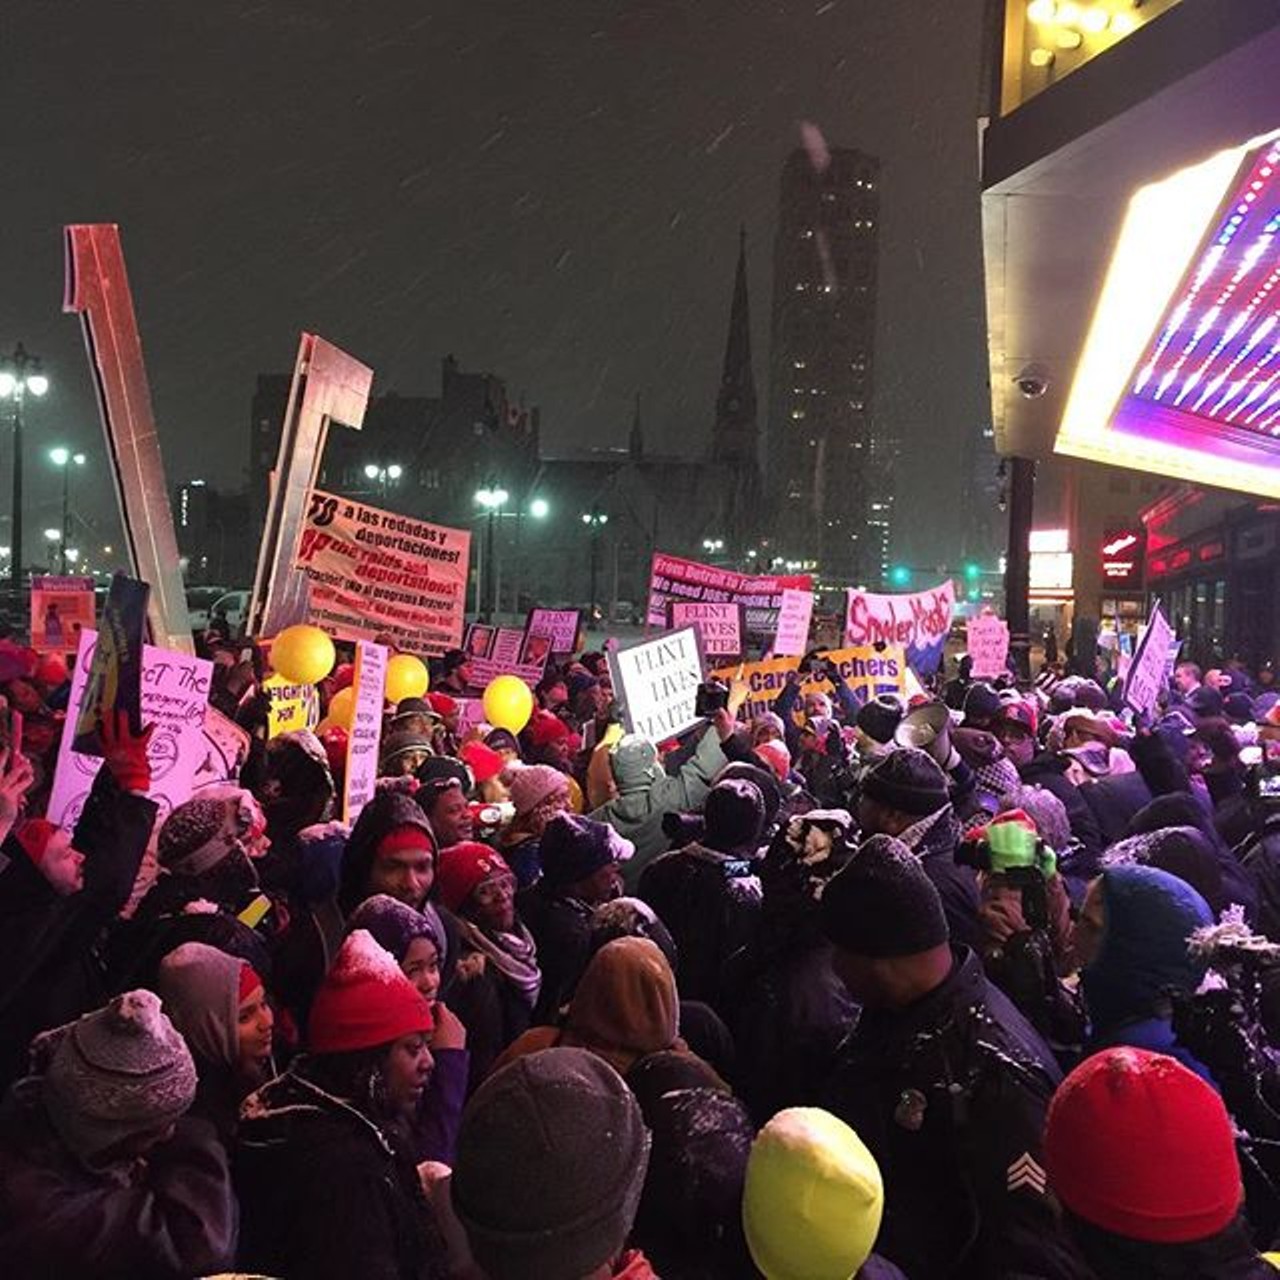 Demonstrators from local and national movements took to the streets as the national spotlight turned to Detroit for the last GOP debate before Michigan&#146;s primary elections.
Photo via Instagram user @SpencerWhite_0